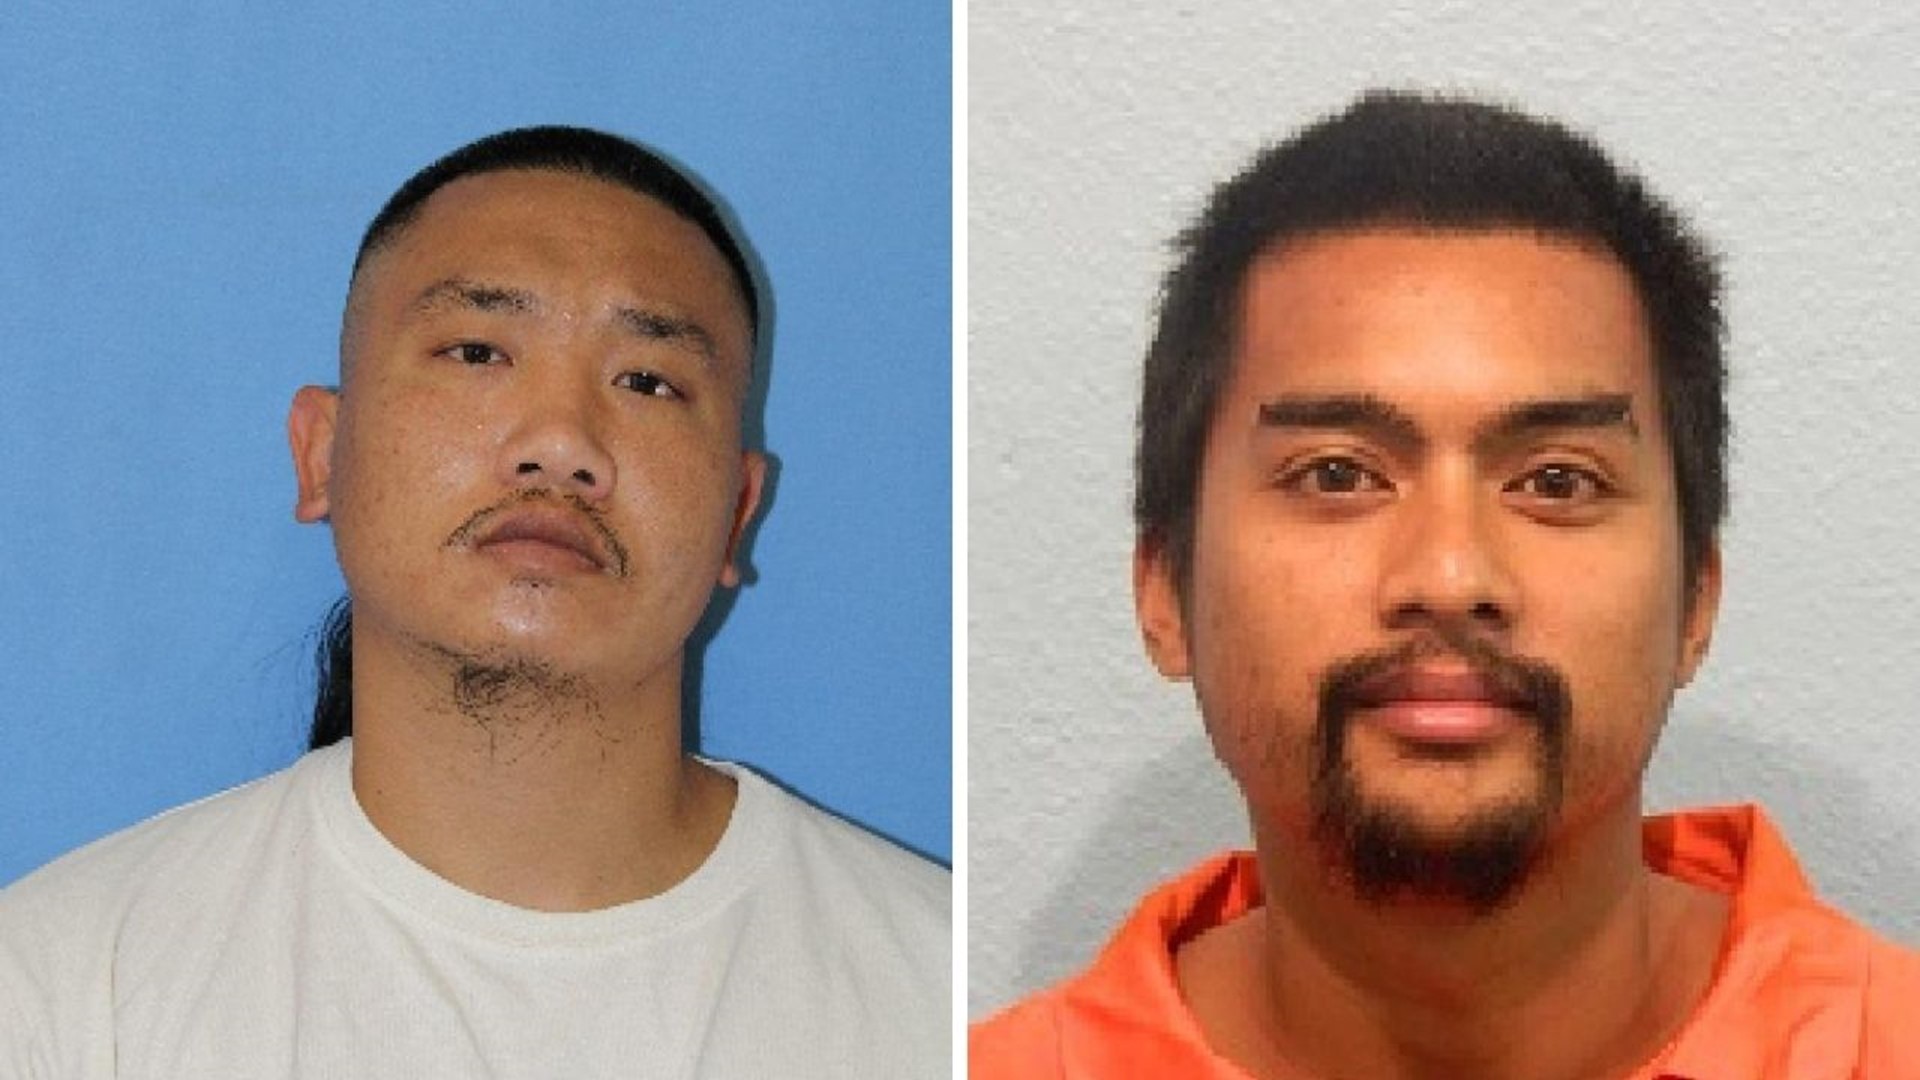 Branden Cerna and Stanley Lee face a number of charges, including first-degree theft and theft of a motor vehicle.